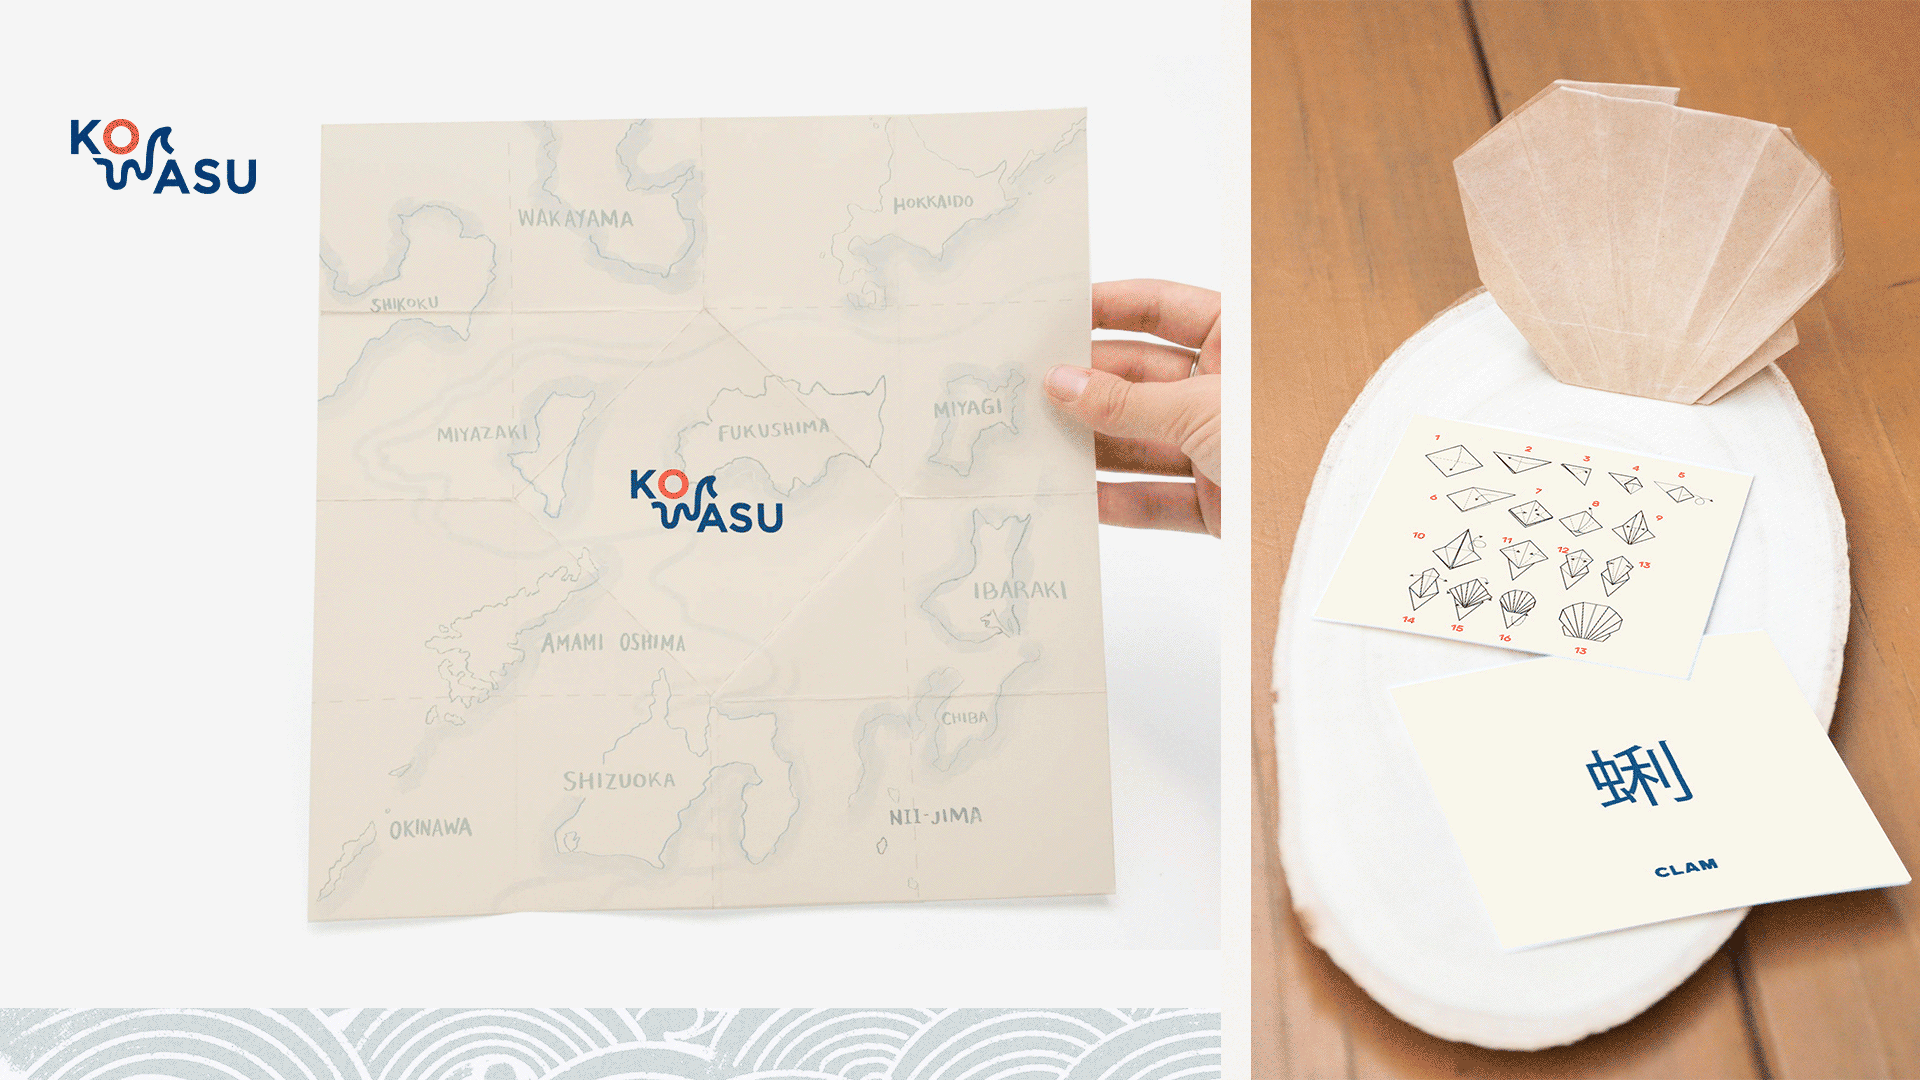 A gif, playing through 4 different images of the Kowasu menu —on left. Image of clam origami with step-by-step instructions on a table —on right.